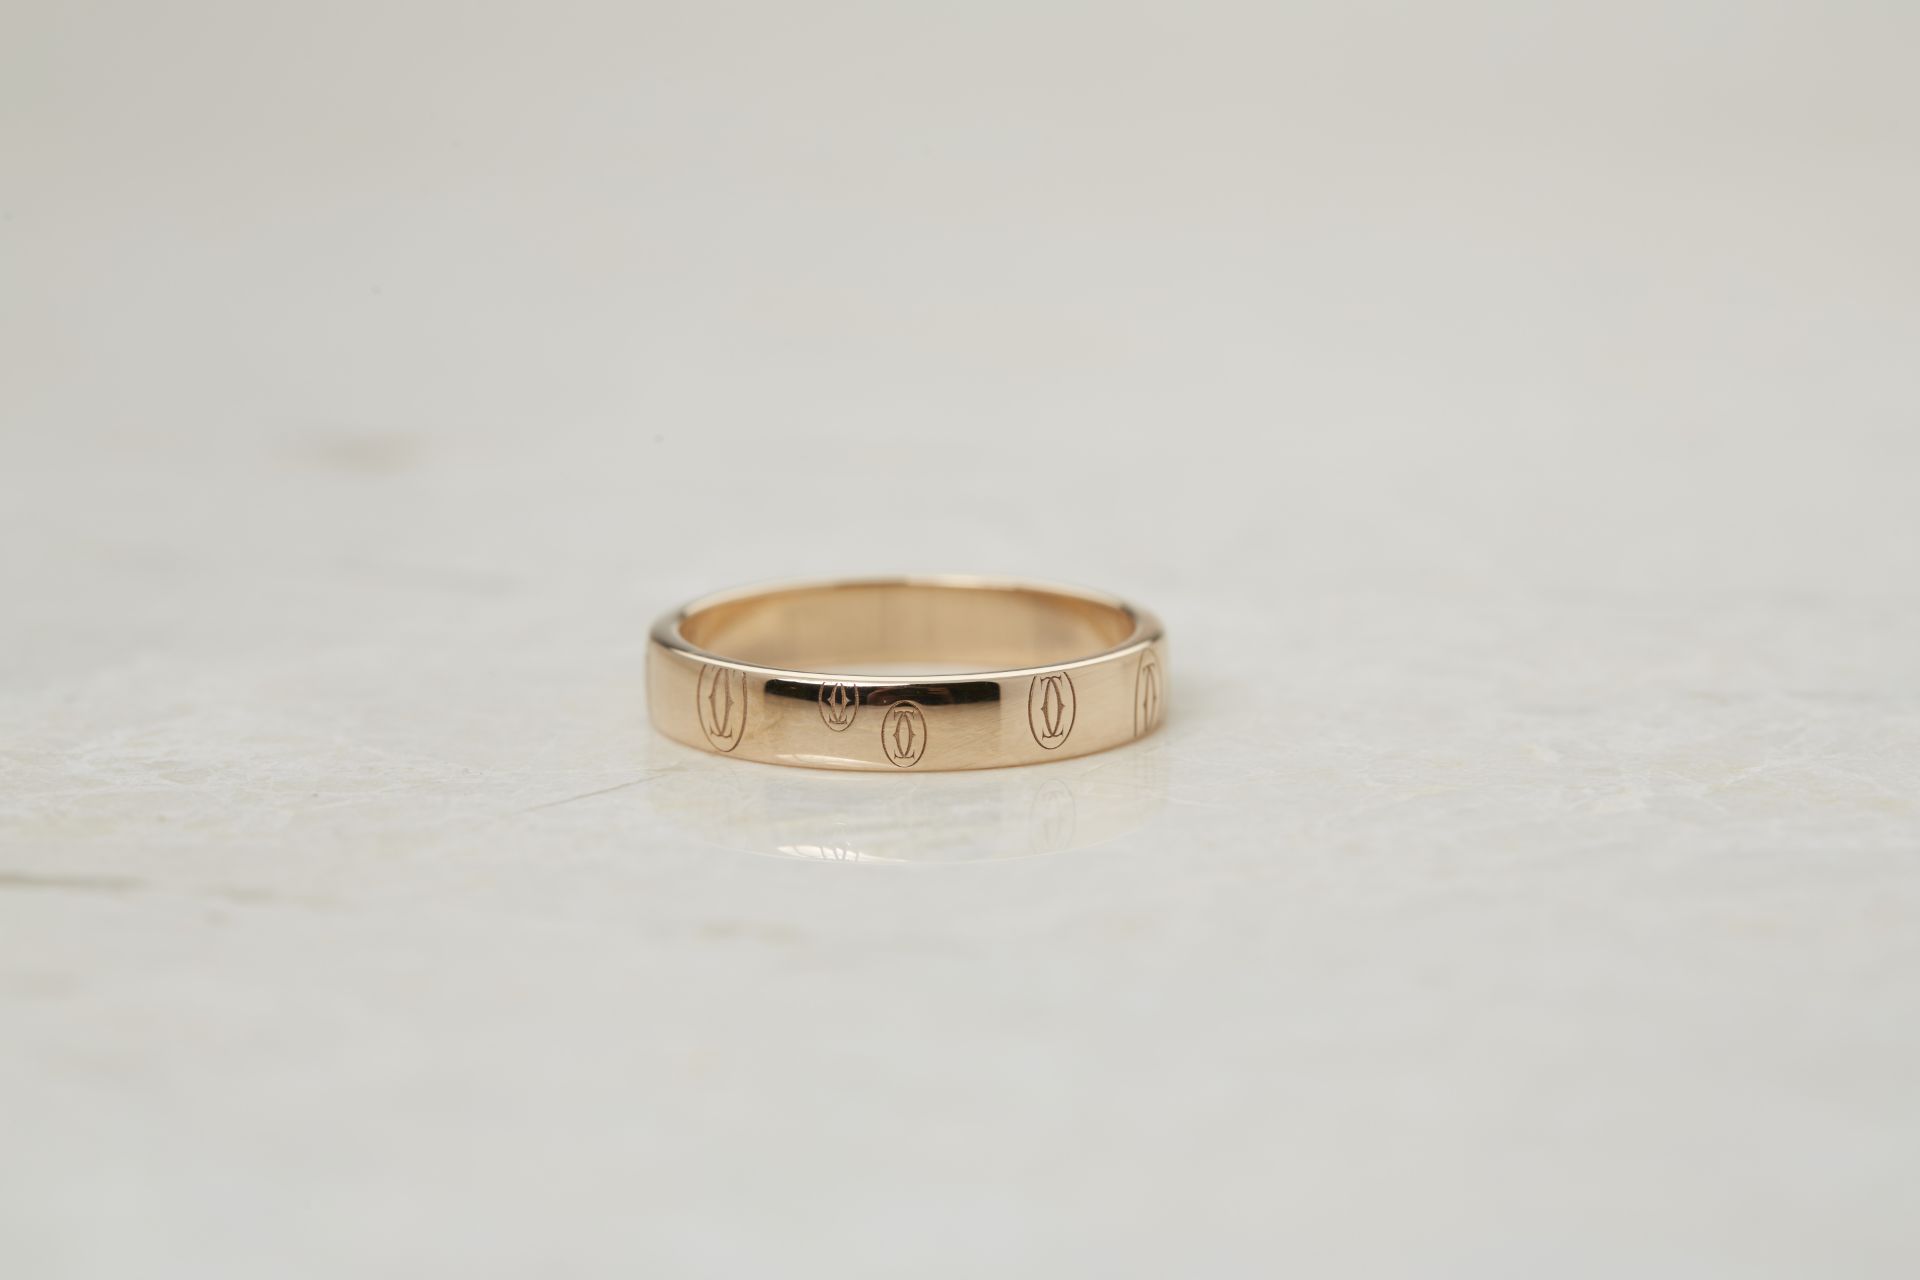 Cartier 18k Rose Gold Double C Logo Design Ring with Presentation Box - Image 4 of 7